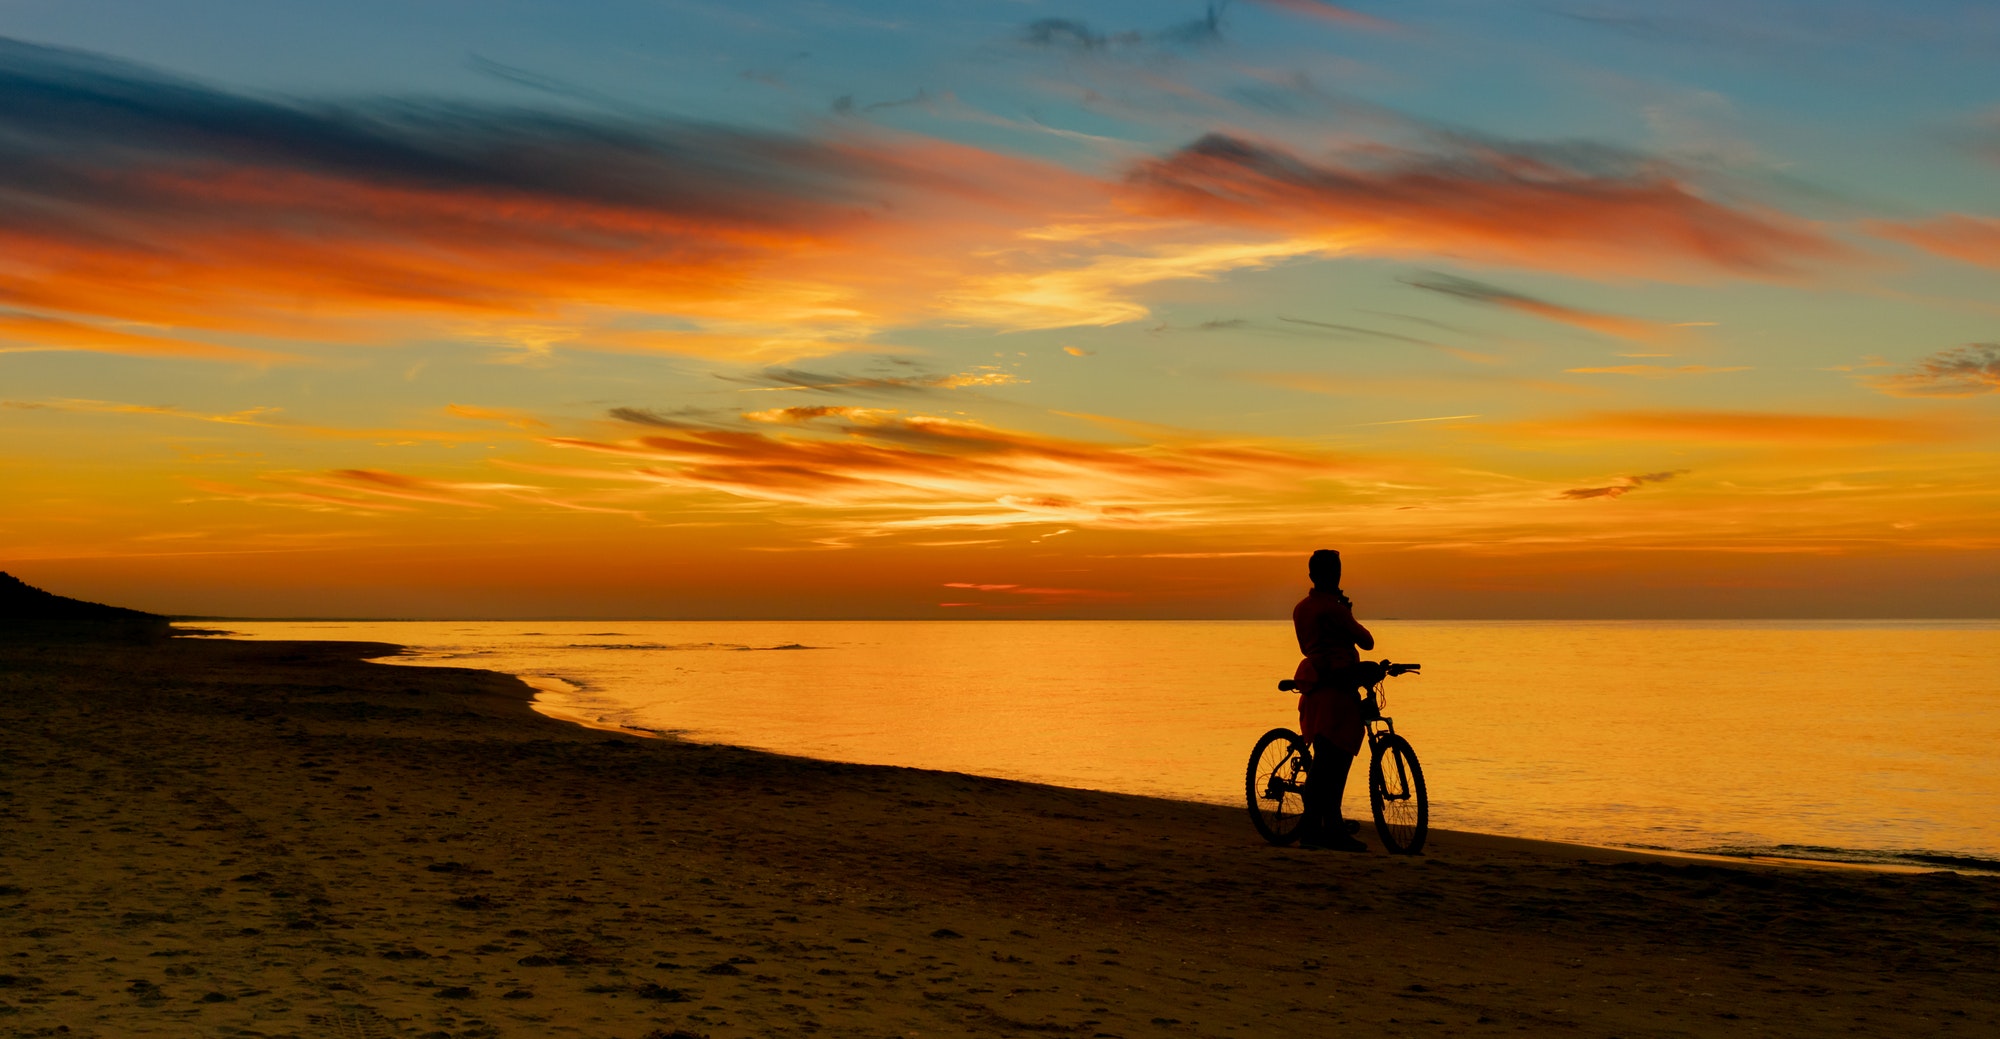 Silhouette of cyclist on beach against backdrop of sunset at sea shore